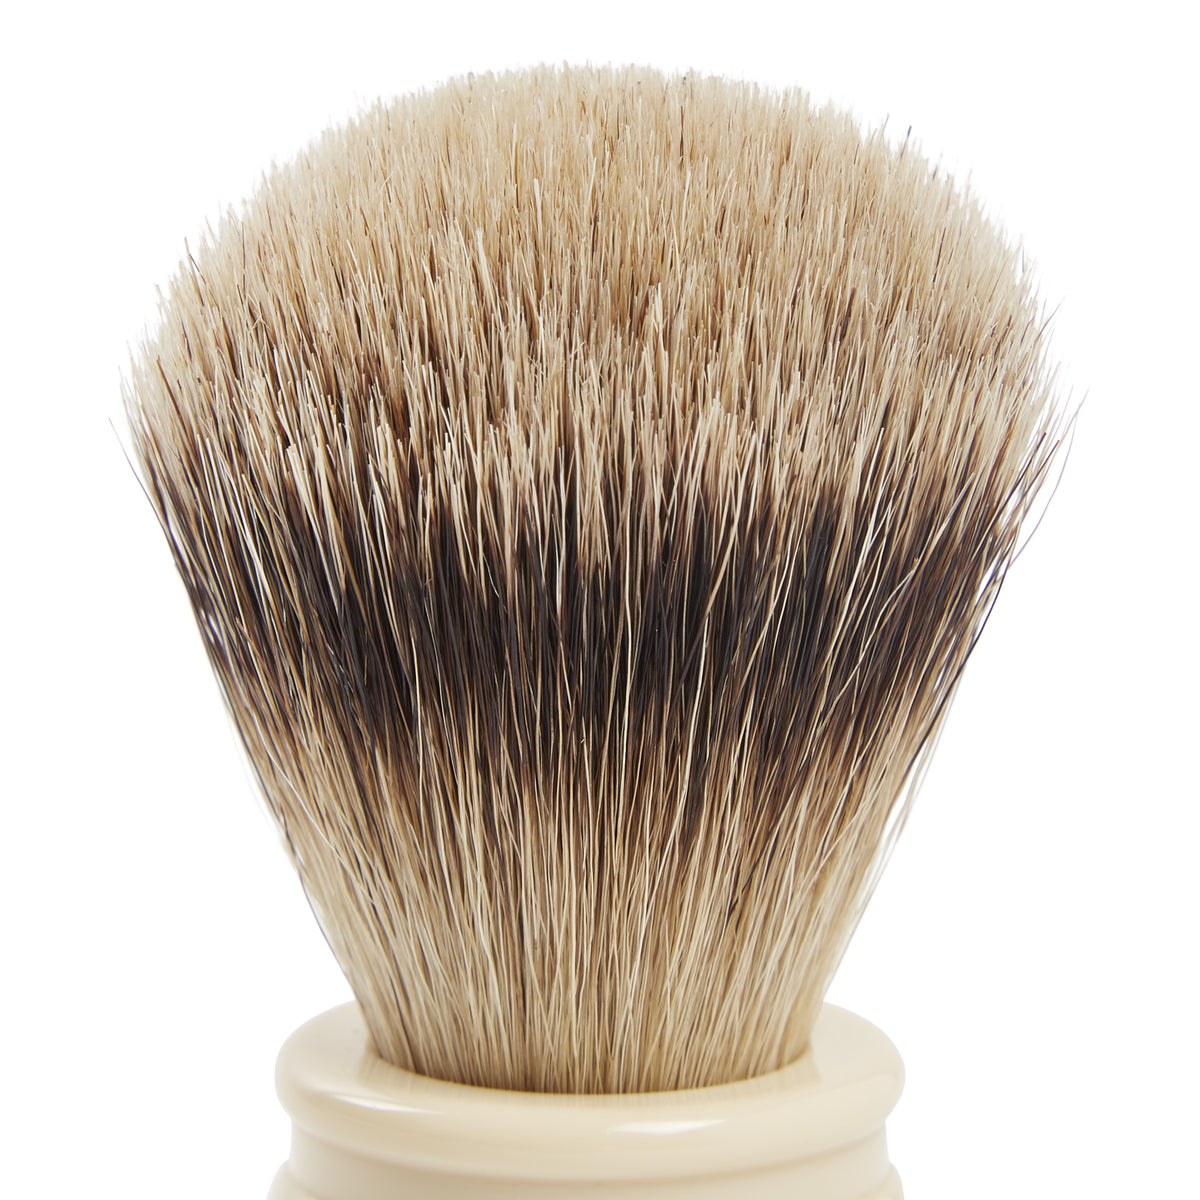 An entry-level Kirby Allison Best Badger Brush on a white background.